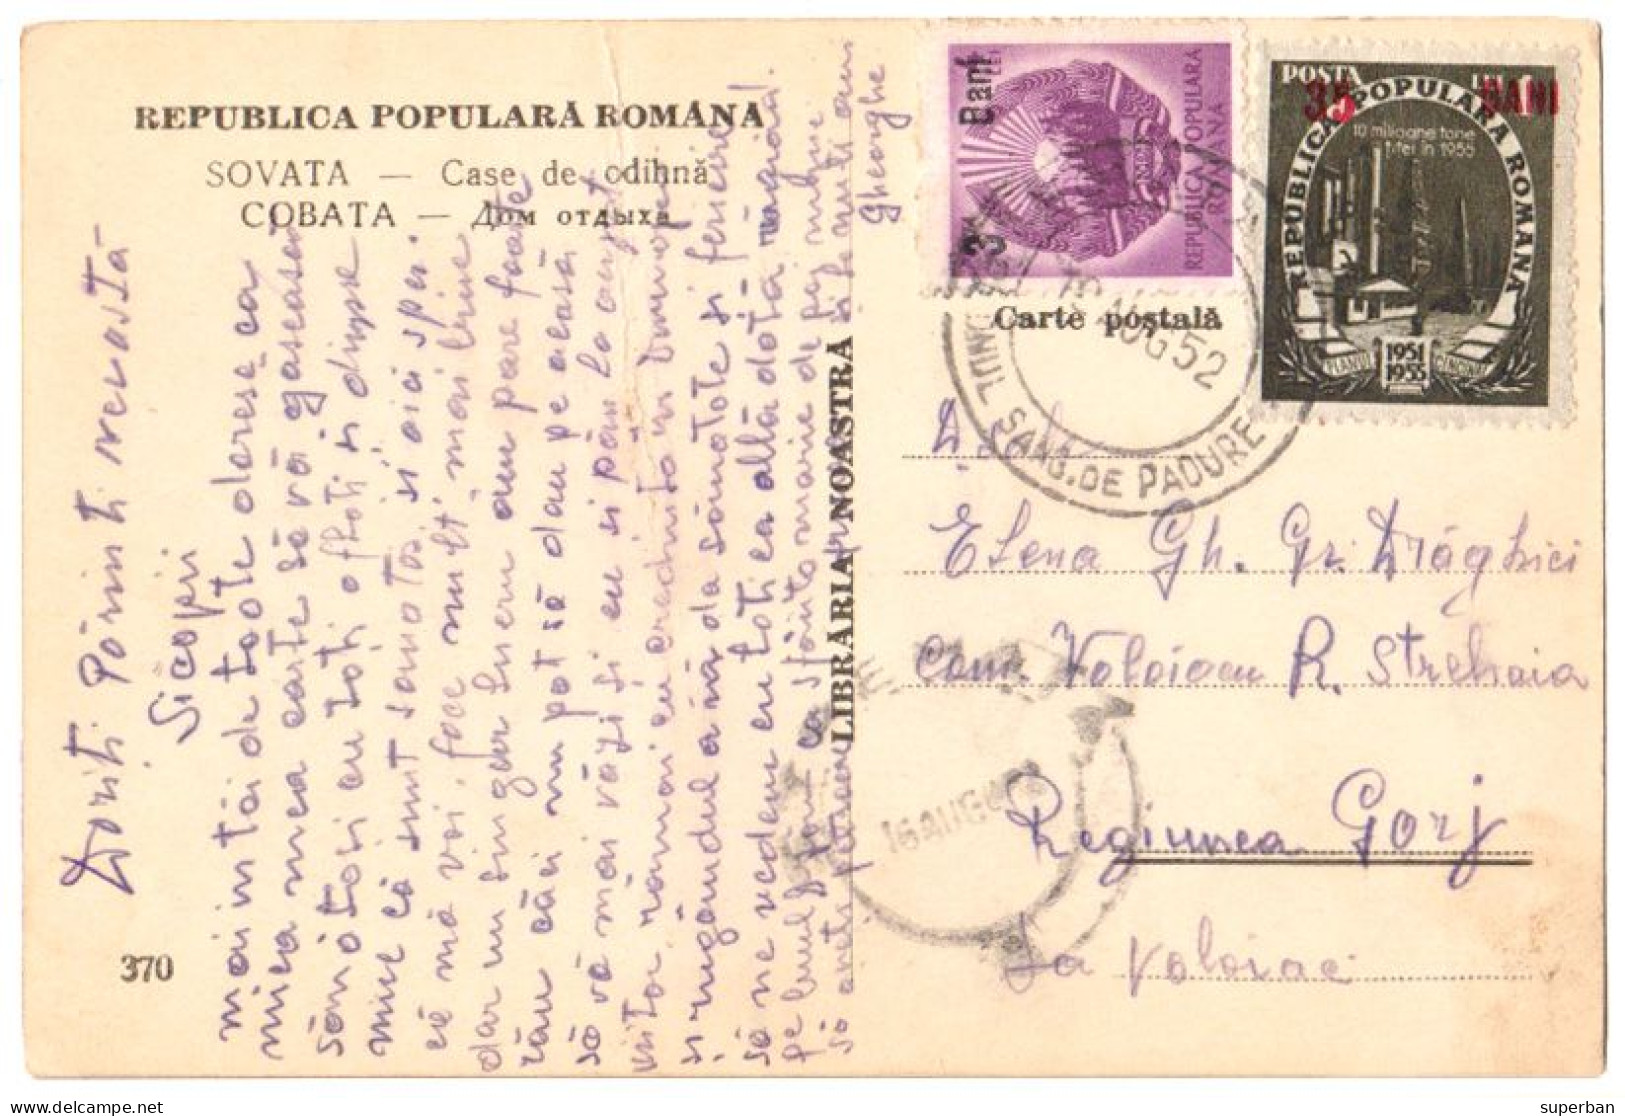 ROMANIA : 1952 - STABILIZAREA MONETARA / MONETARY STABILIZATION - POSTCARD MAILED With OVERPRINTED STAMPS - RRR (am195) - Lettres & Documents